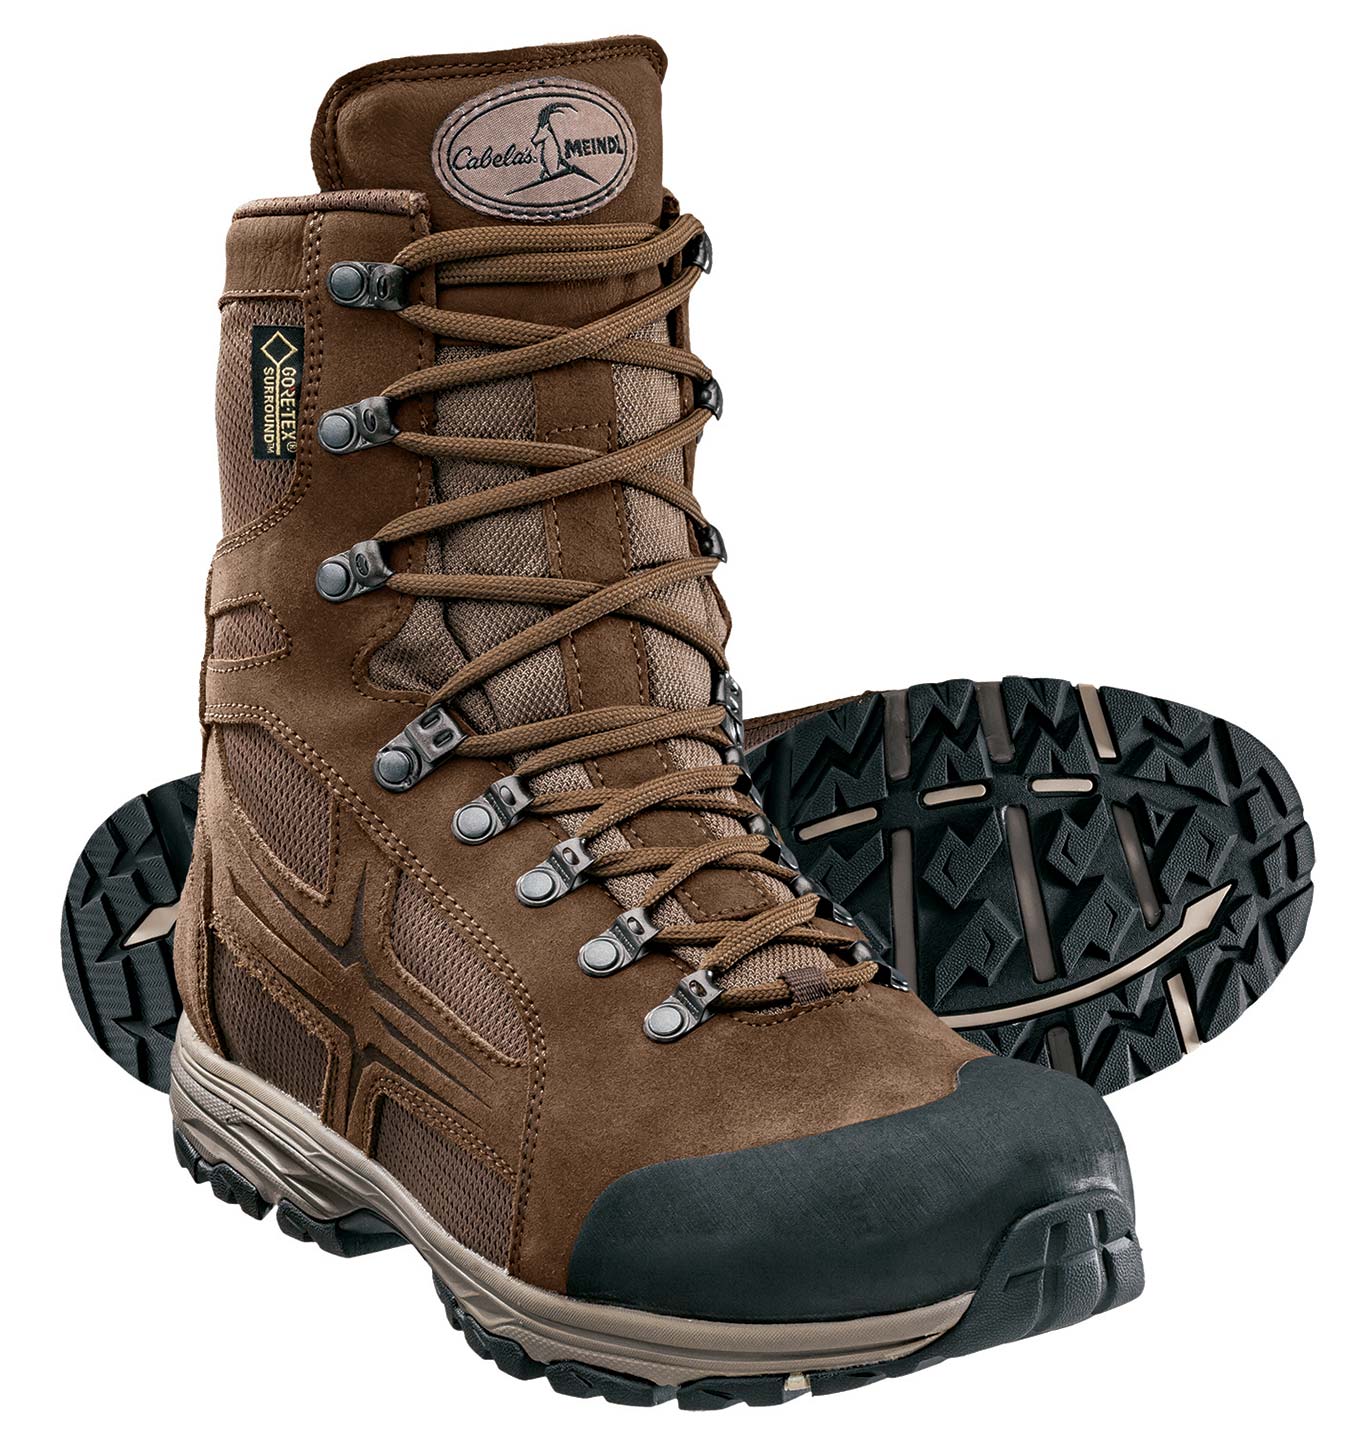 Cabela’s Meindl GORE-TEX Surround Hunting Boots FDGG